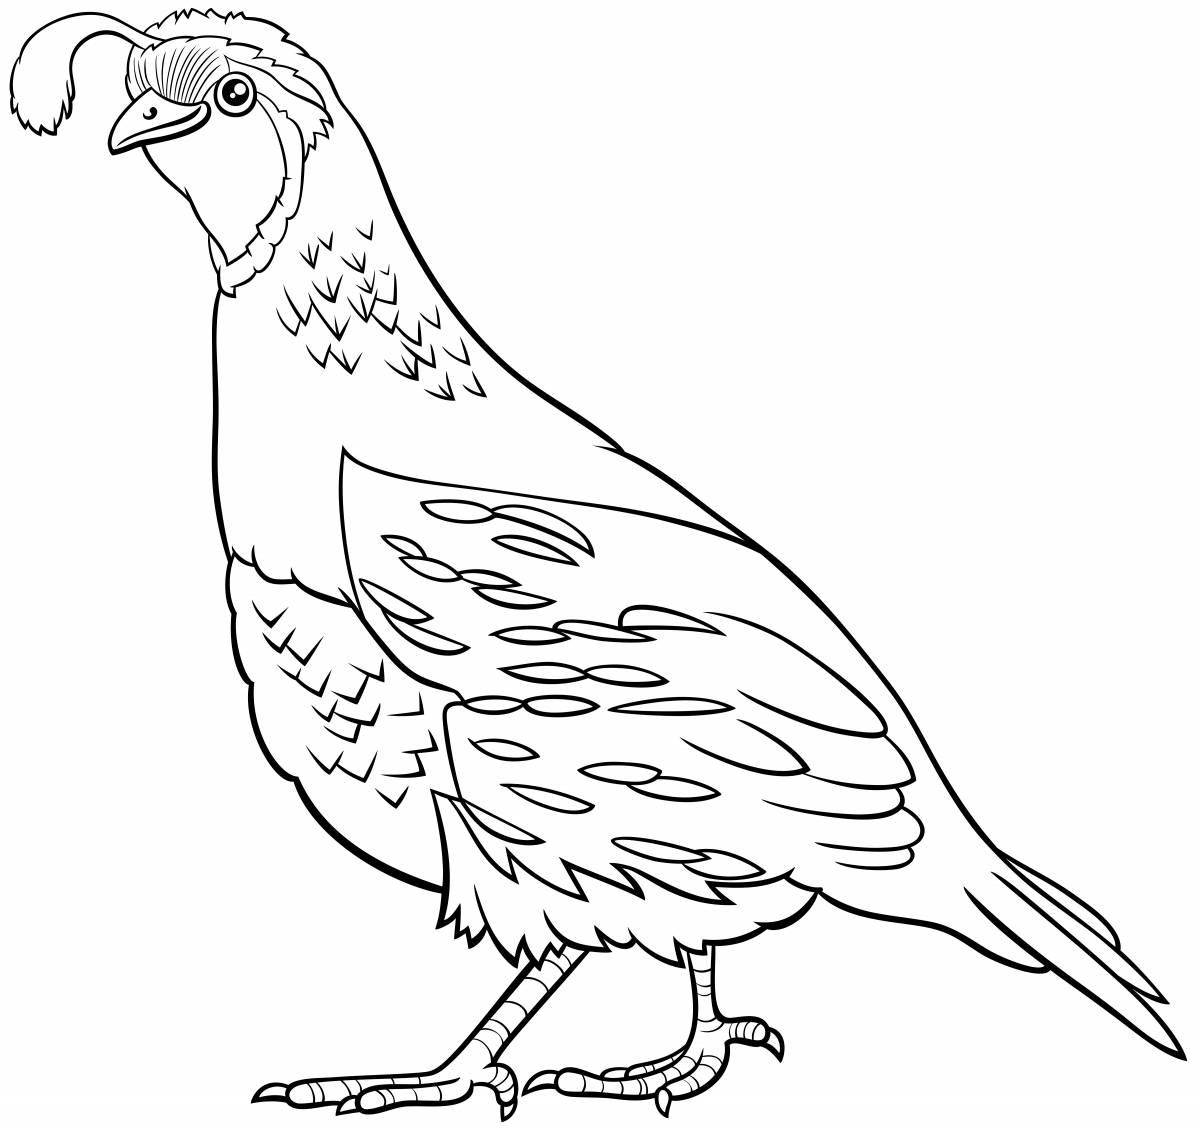 Colorful quail coloring page